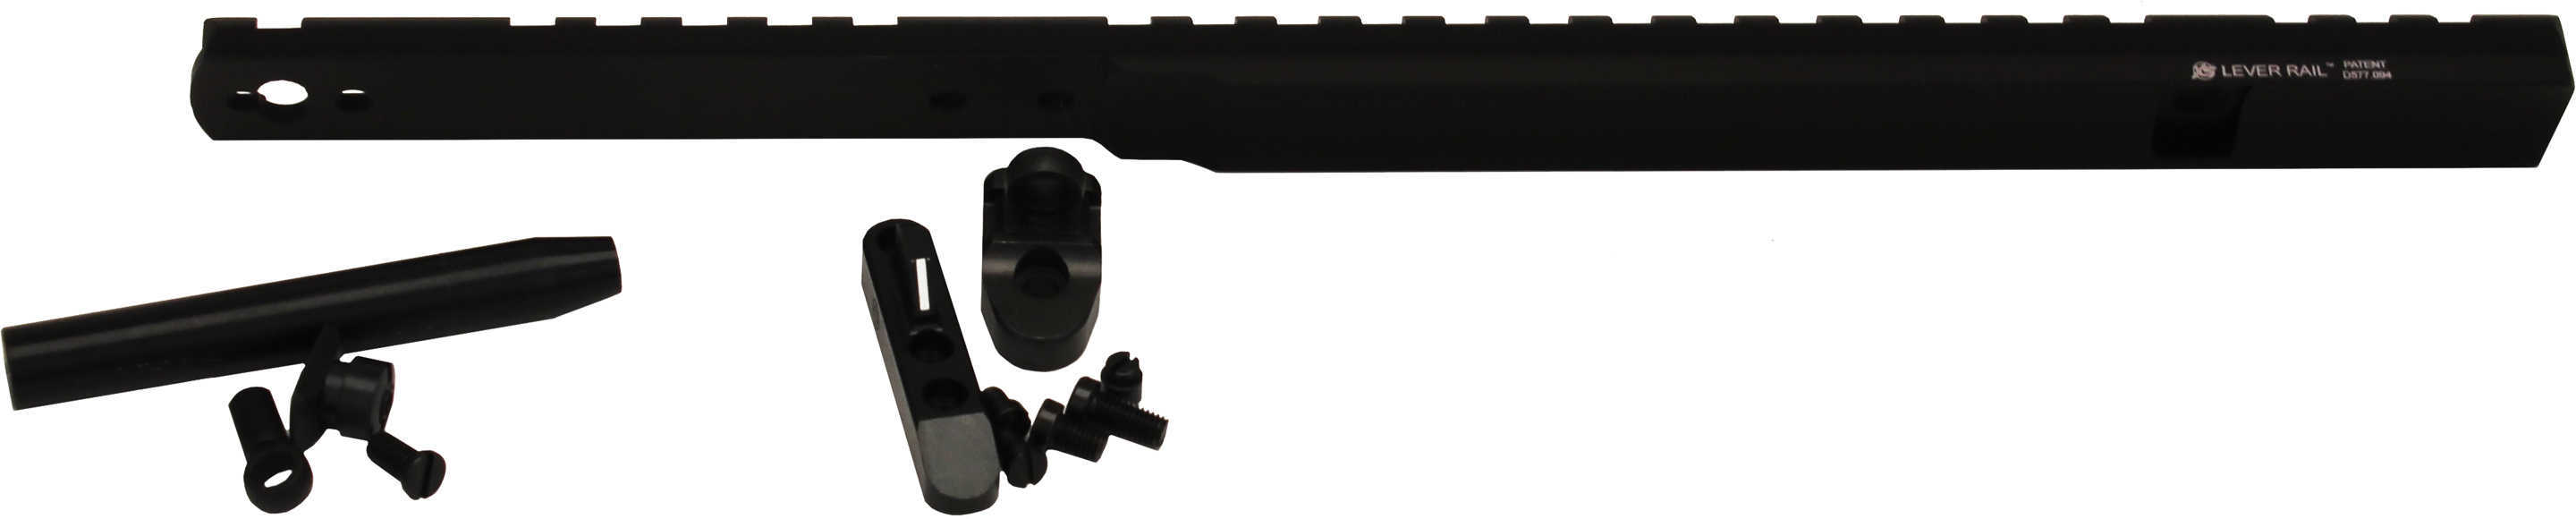 XS Sight Systems Lever Rail Ghost Ring Set Marlin 1895 Md: ML-1001-5-img-1